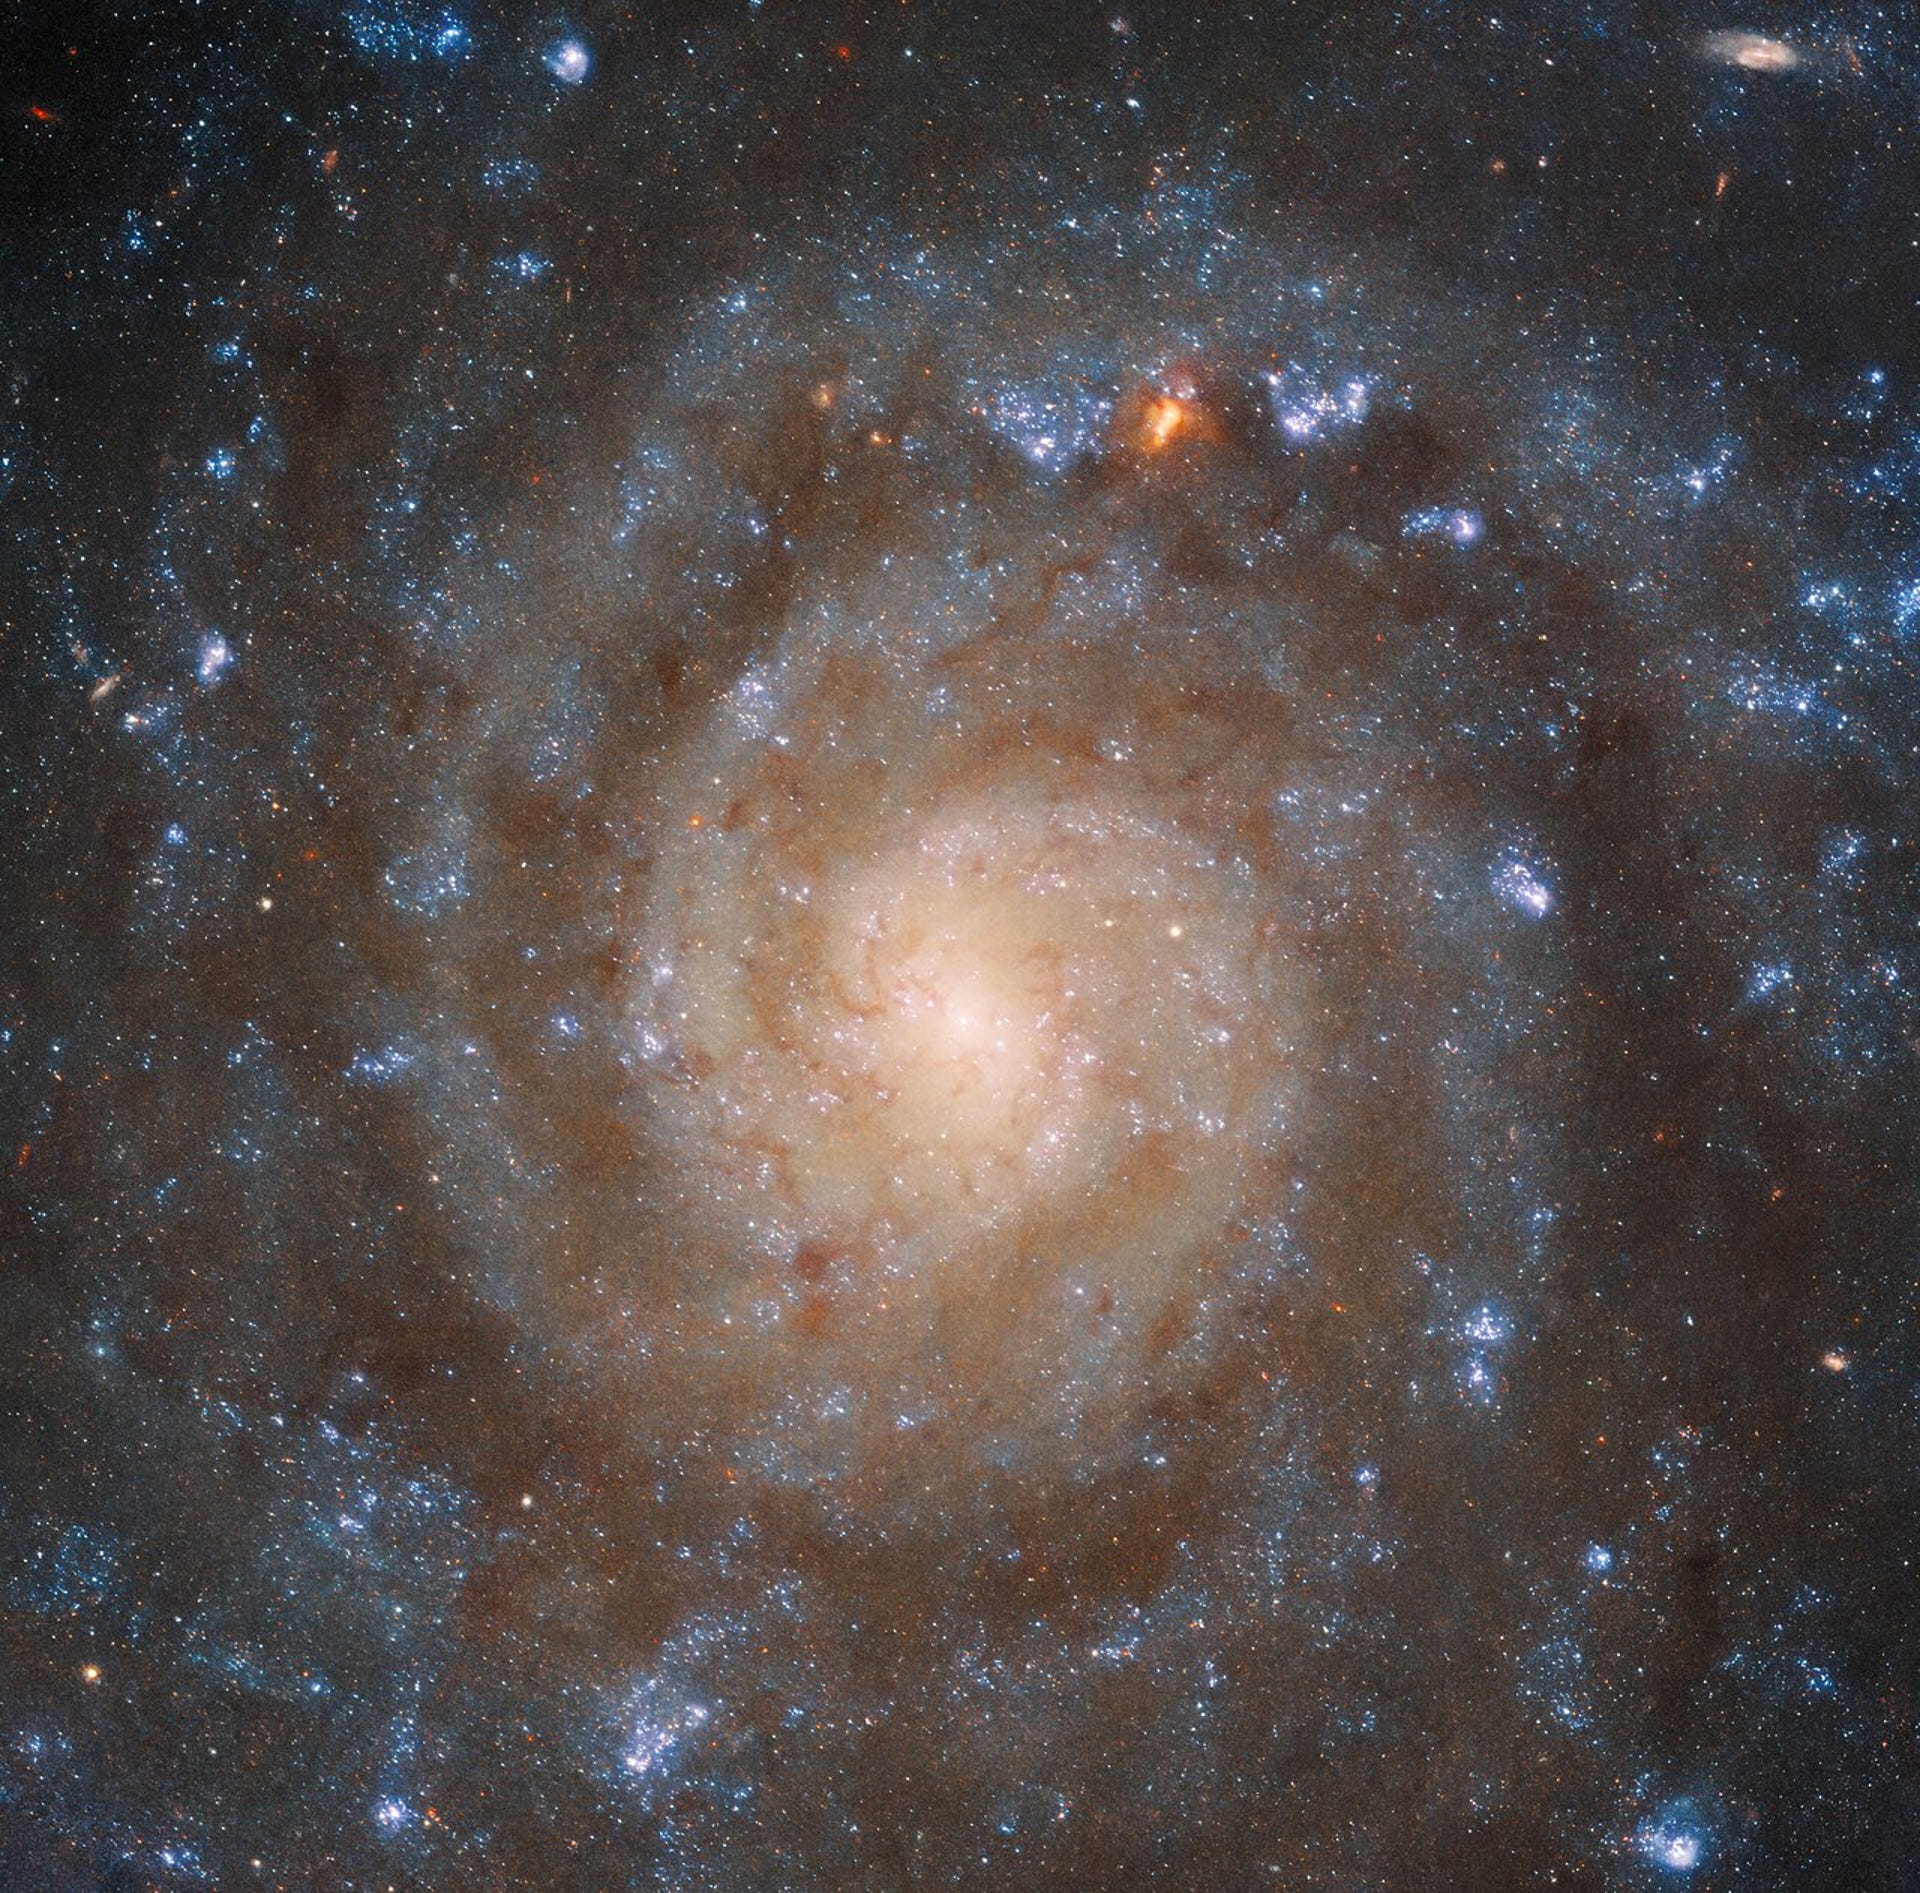 Hubble's view of spiral galaxy IC 5332 looks softer and more diffuse than Webb's. Lots of small glowing stars.